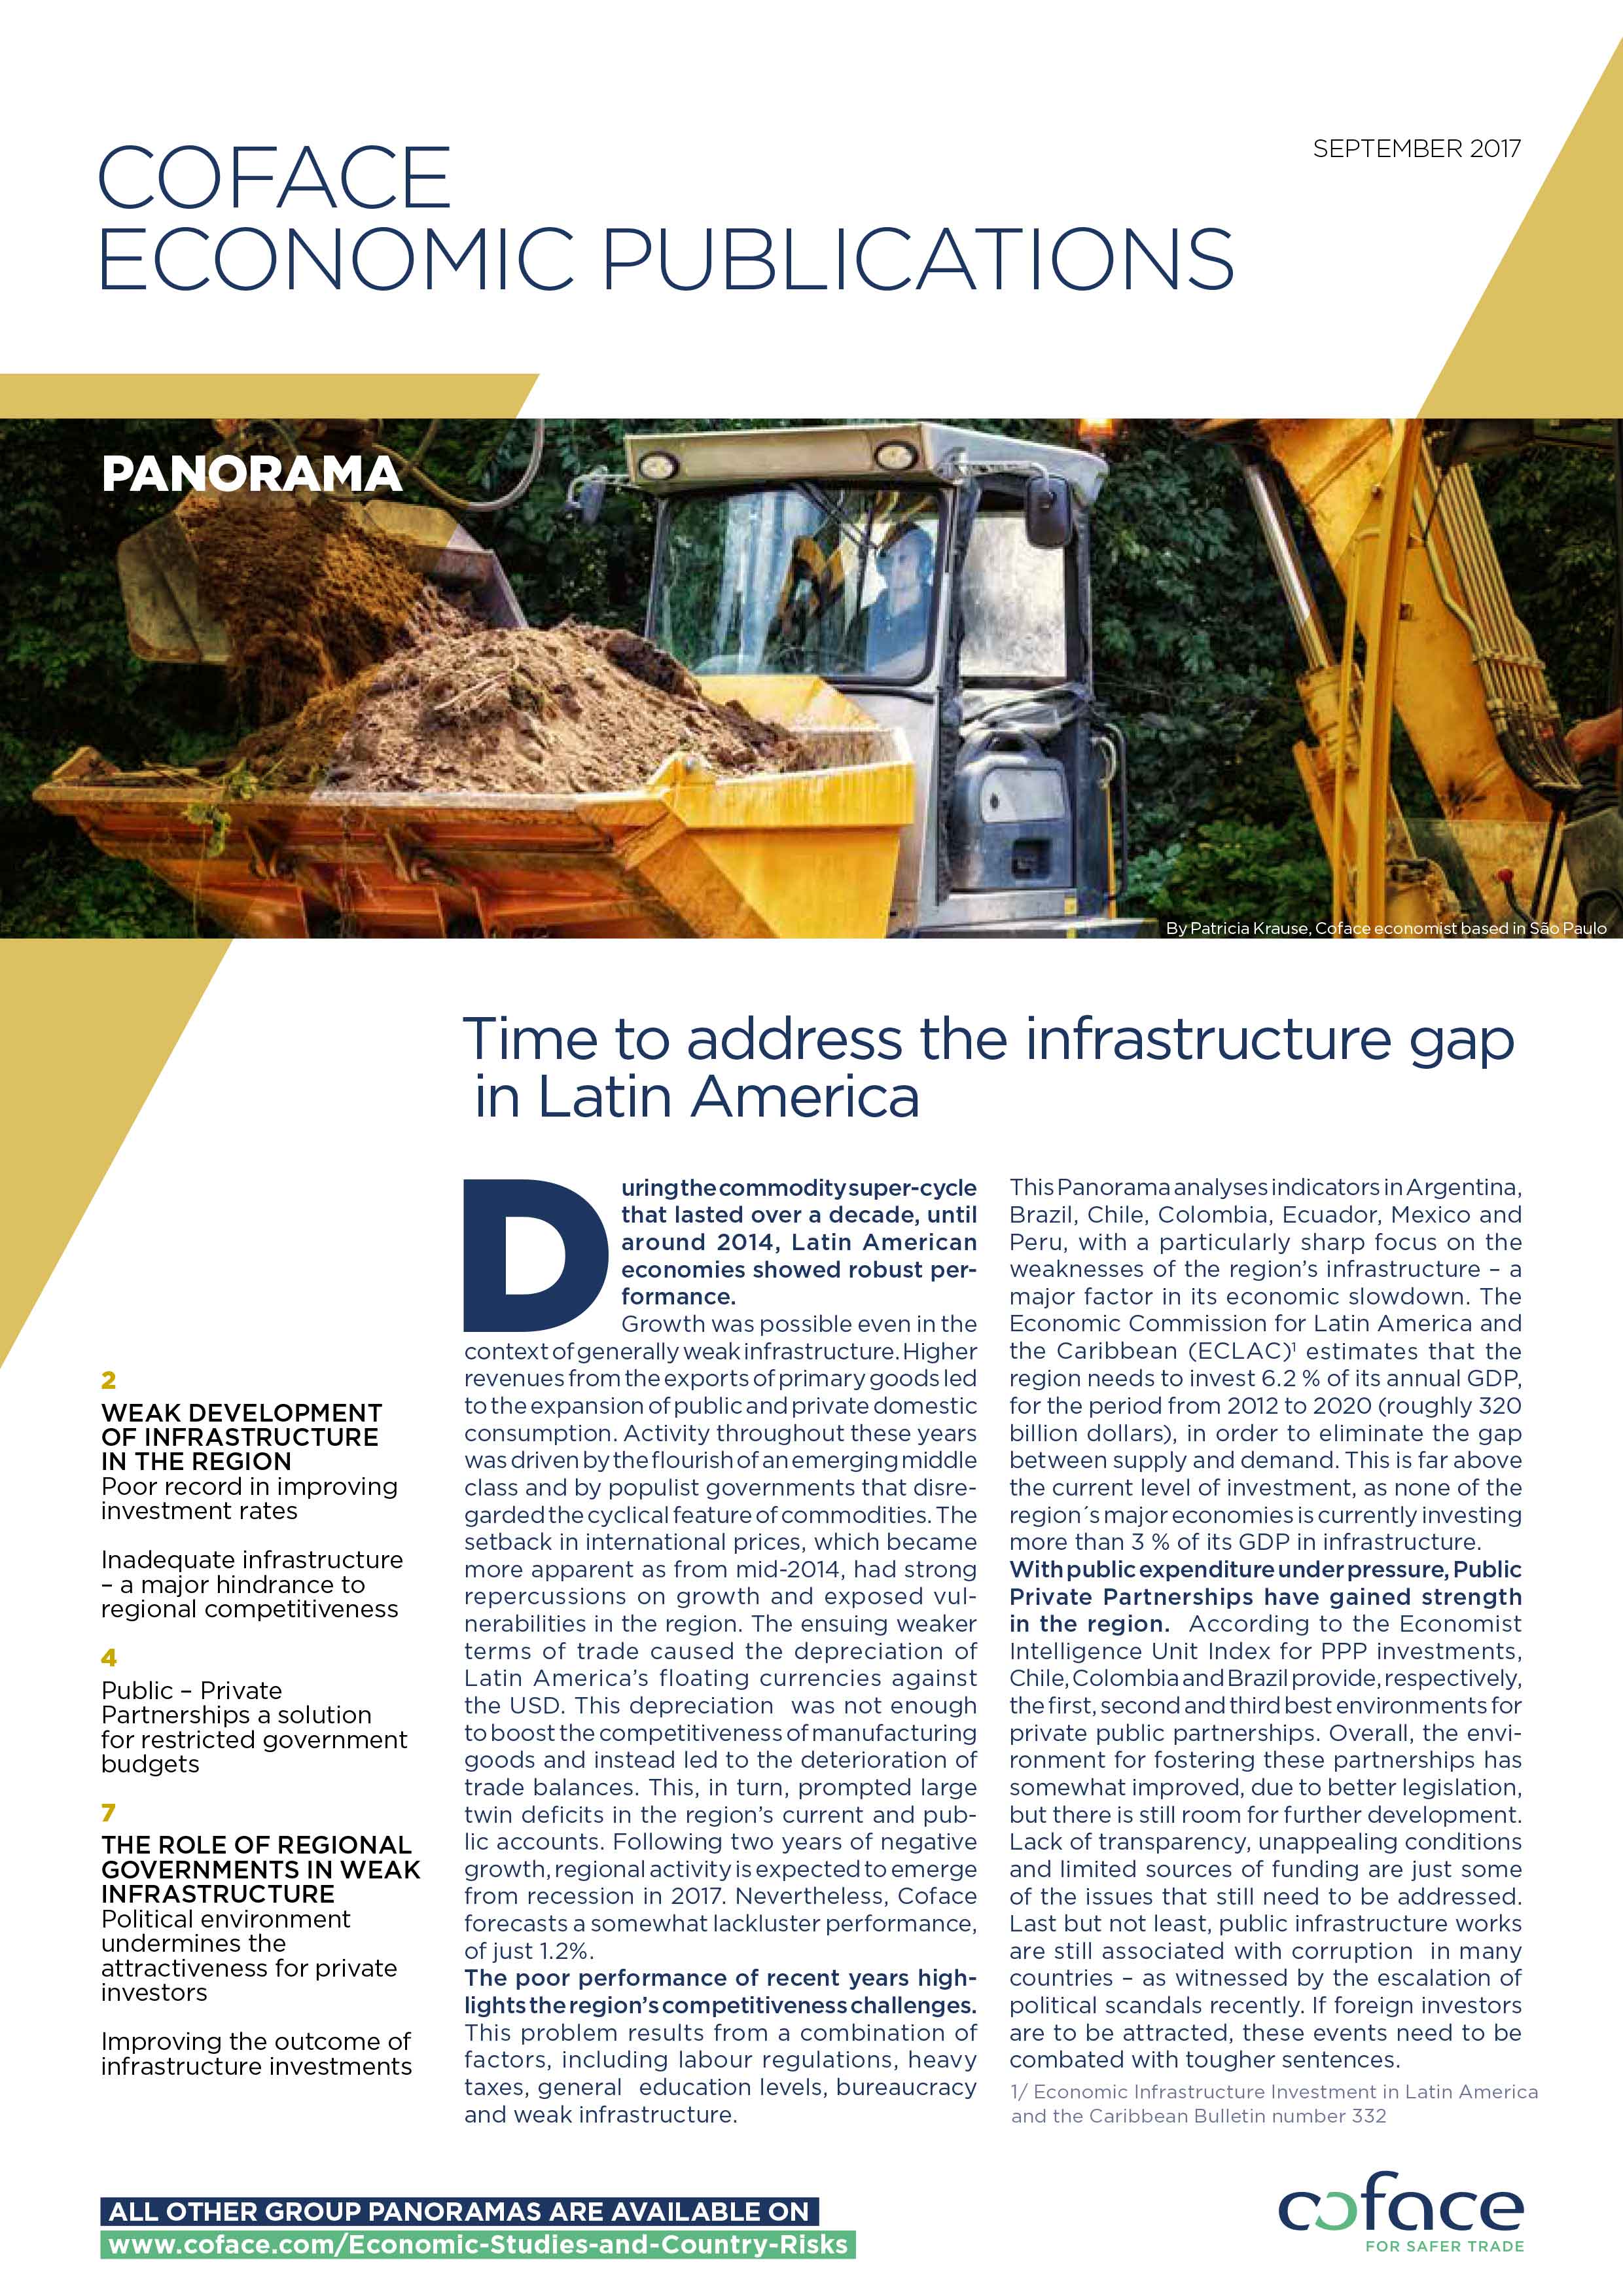 Time to address the infrastructure gap in Latin America